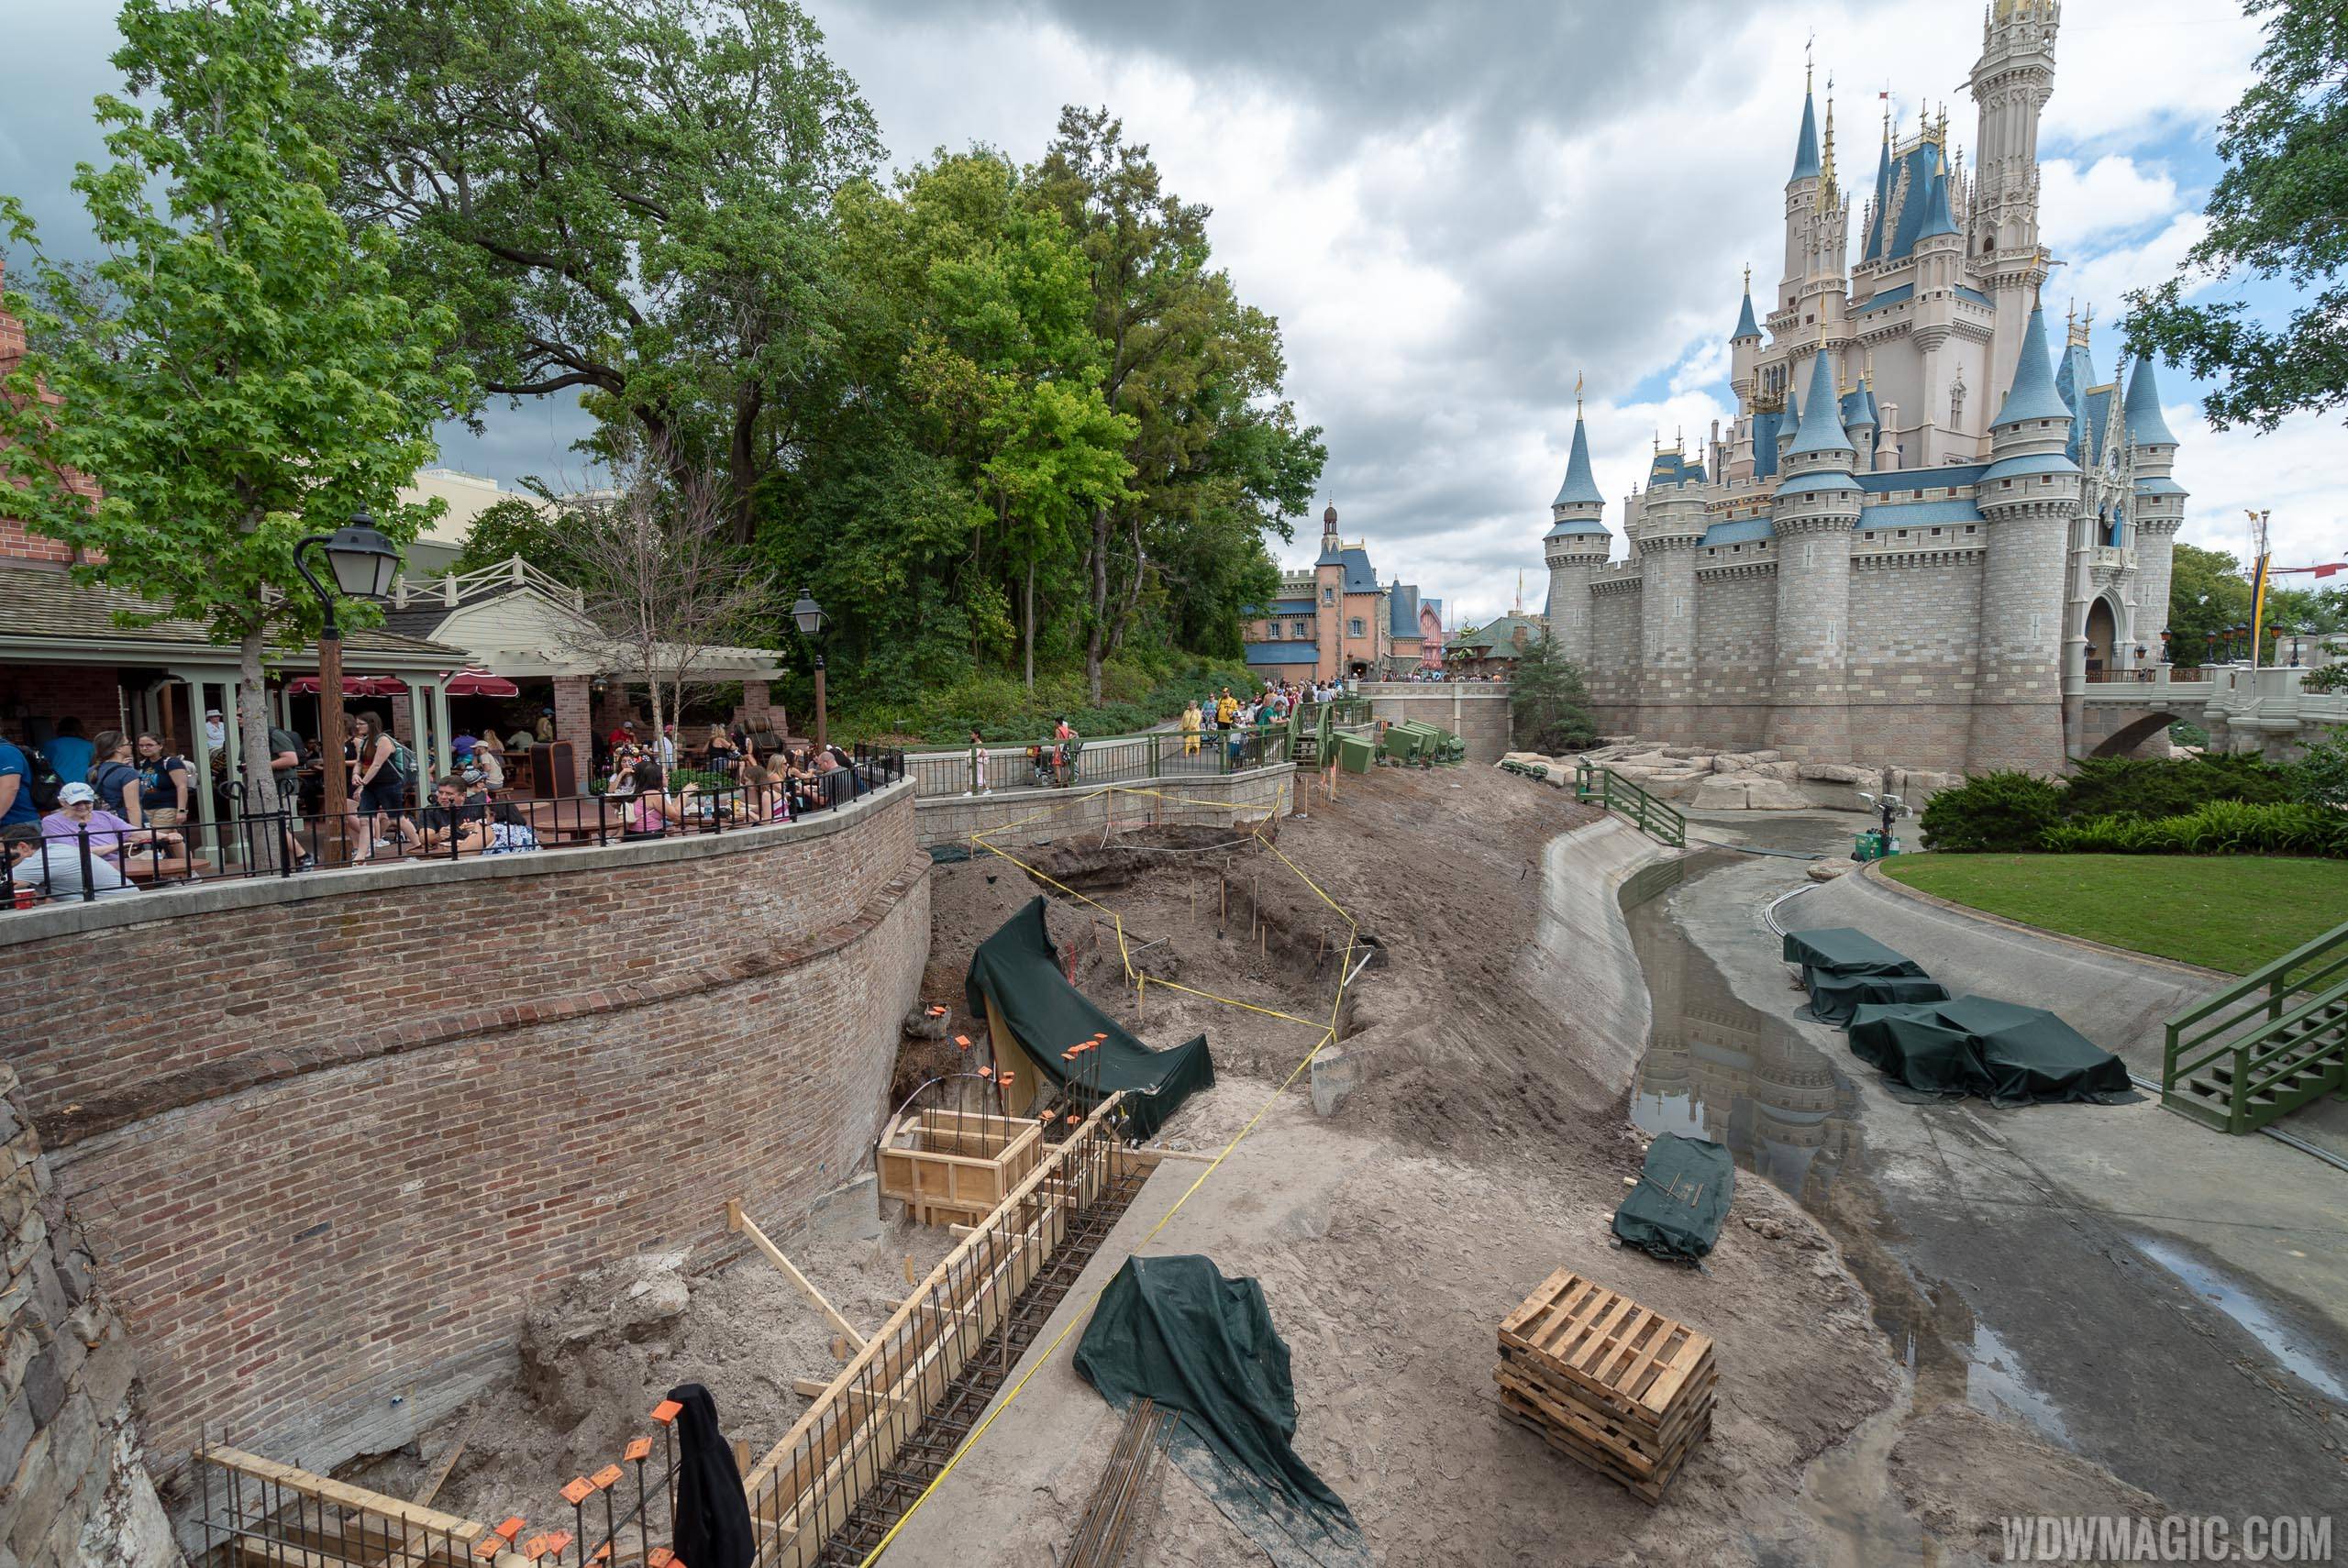 PHOTOS - Latest look at the work on widening the walkway behind Cinderella Castle